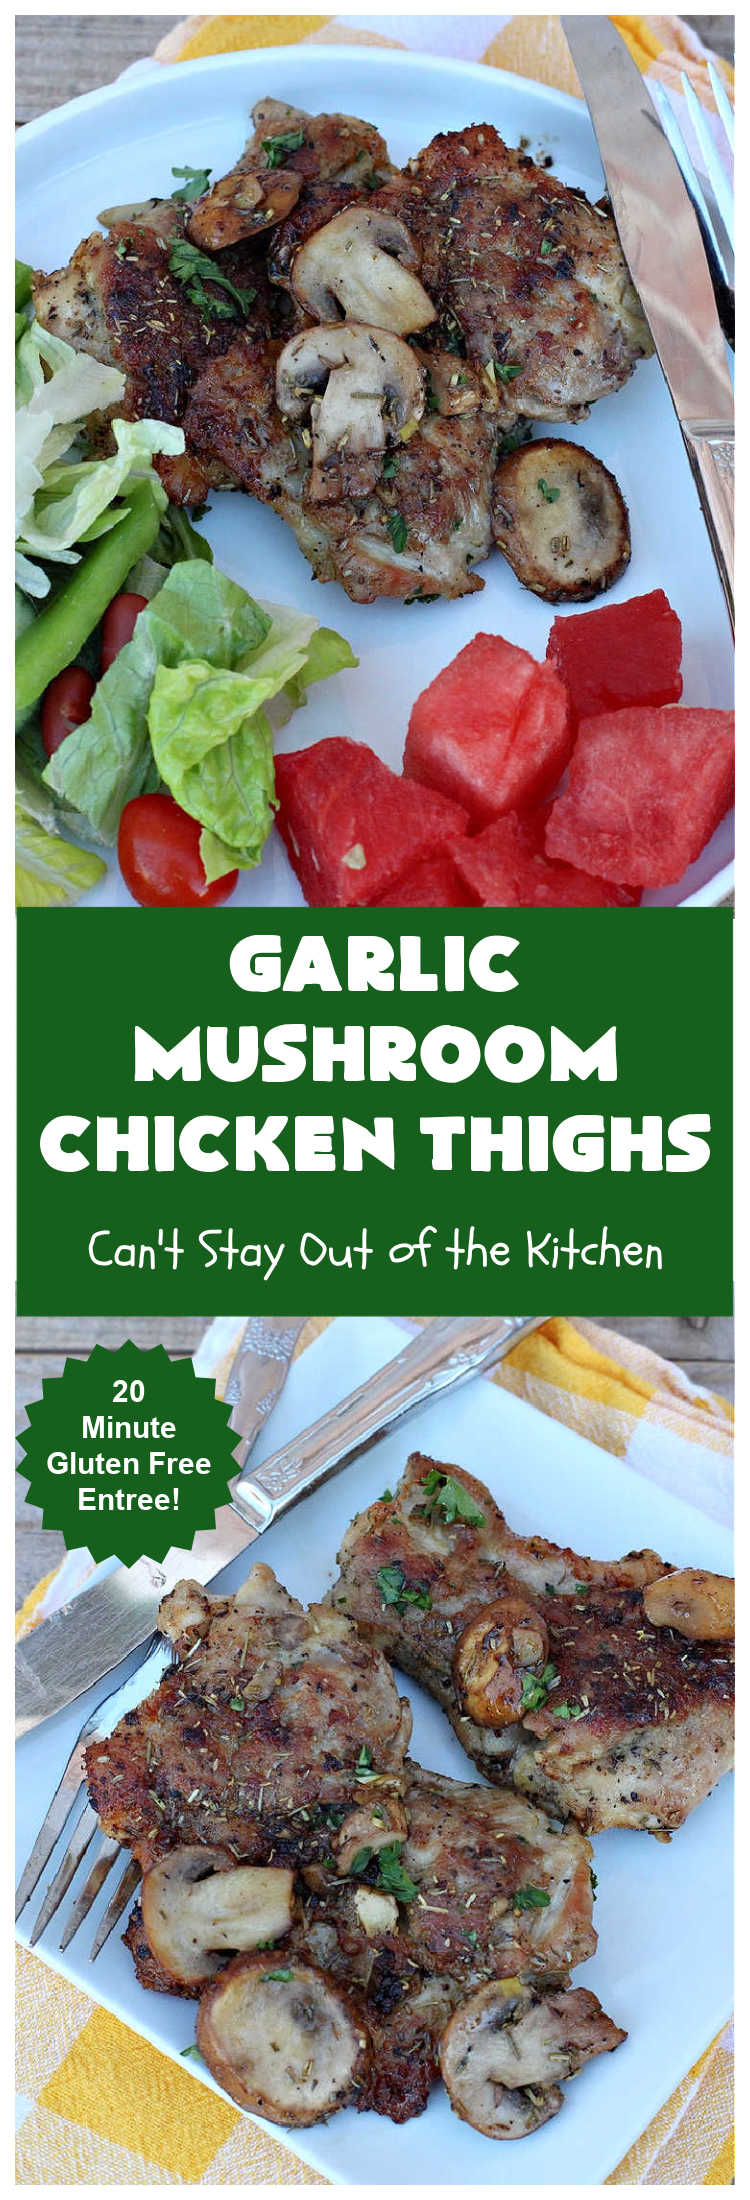 Garlic Mushroom Chicken Thighs | Can't Stay Out of the Kitchen | This is a fantastic 20-minute #chicken entree! It's the best #recipe I've found this year! I made it for a #potluck & everyone raved over it. It pairs well with any side dish & is great for family or company meals. #garlic #mushrooms #GlutenFree #GarlicMushroomChickenThighs